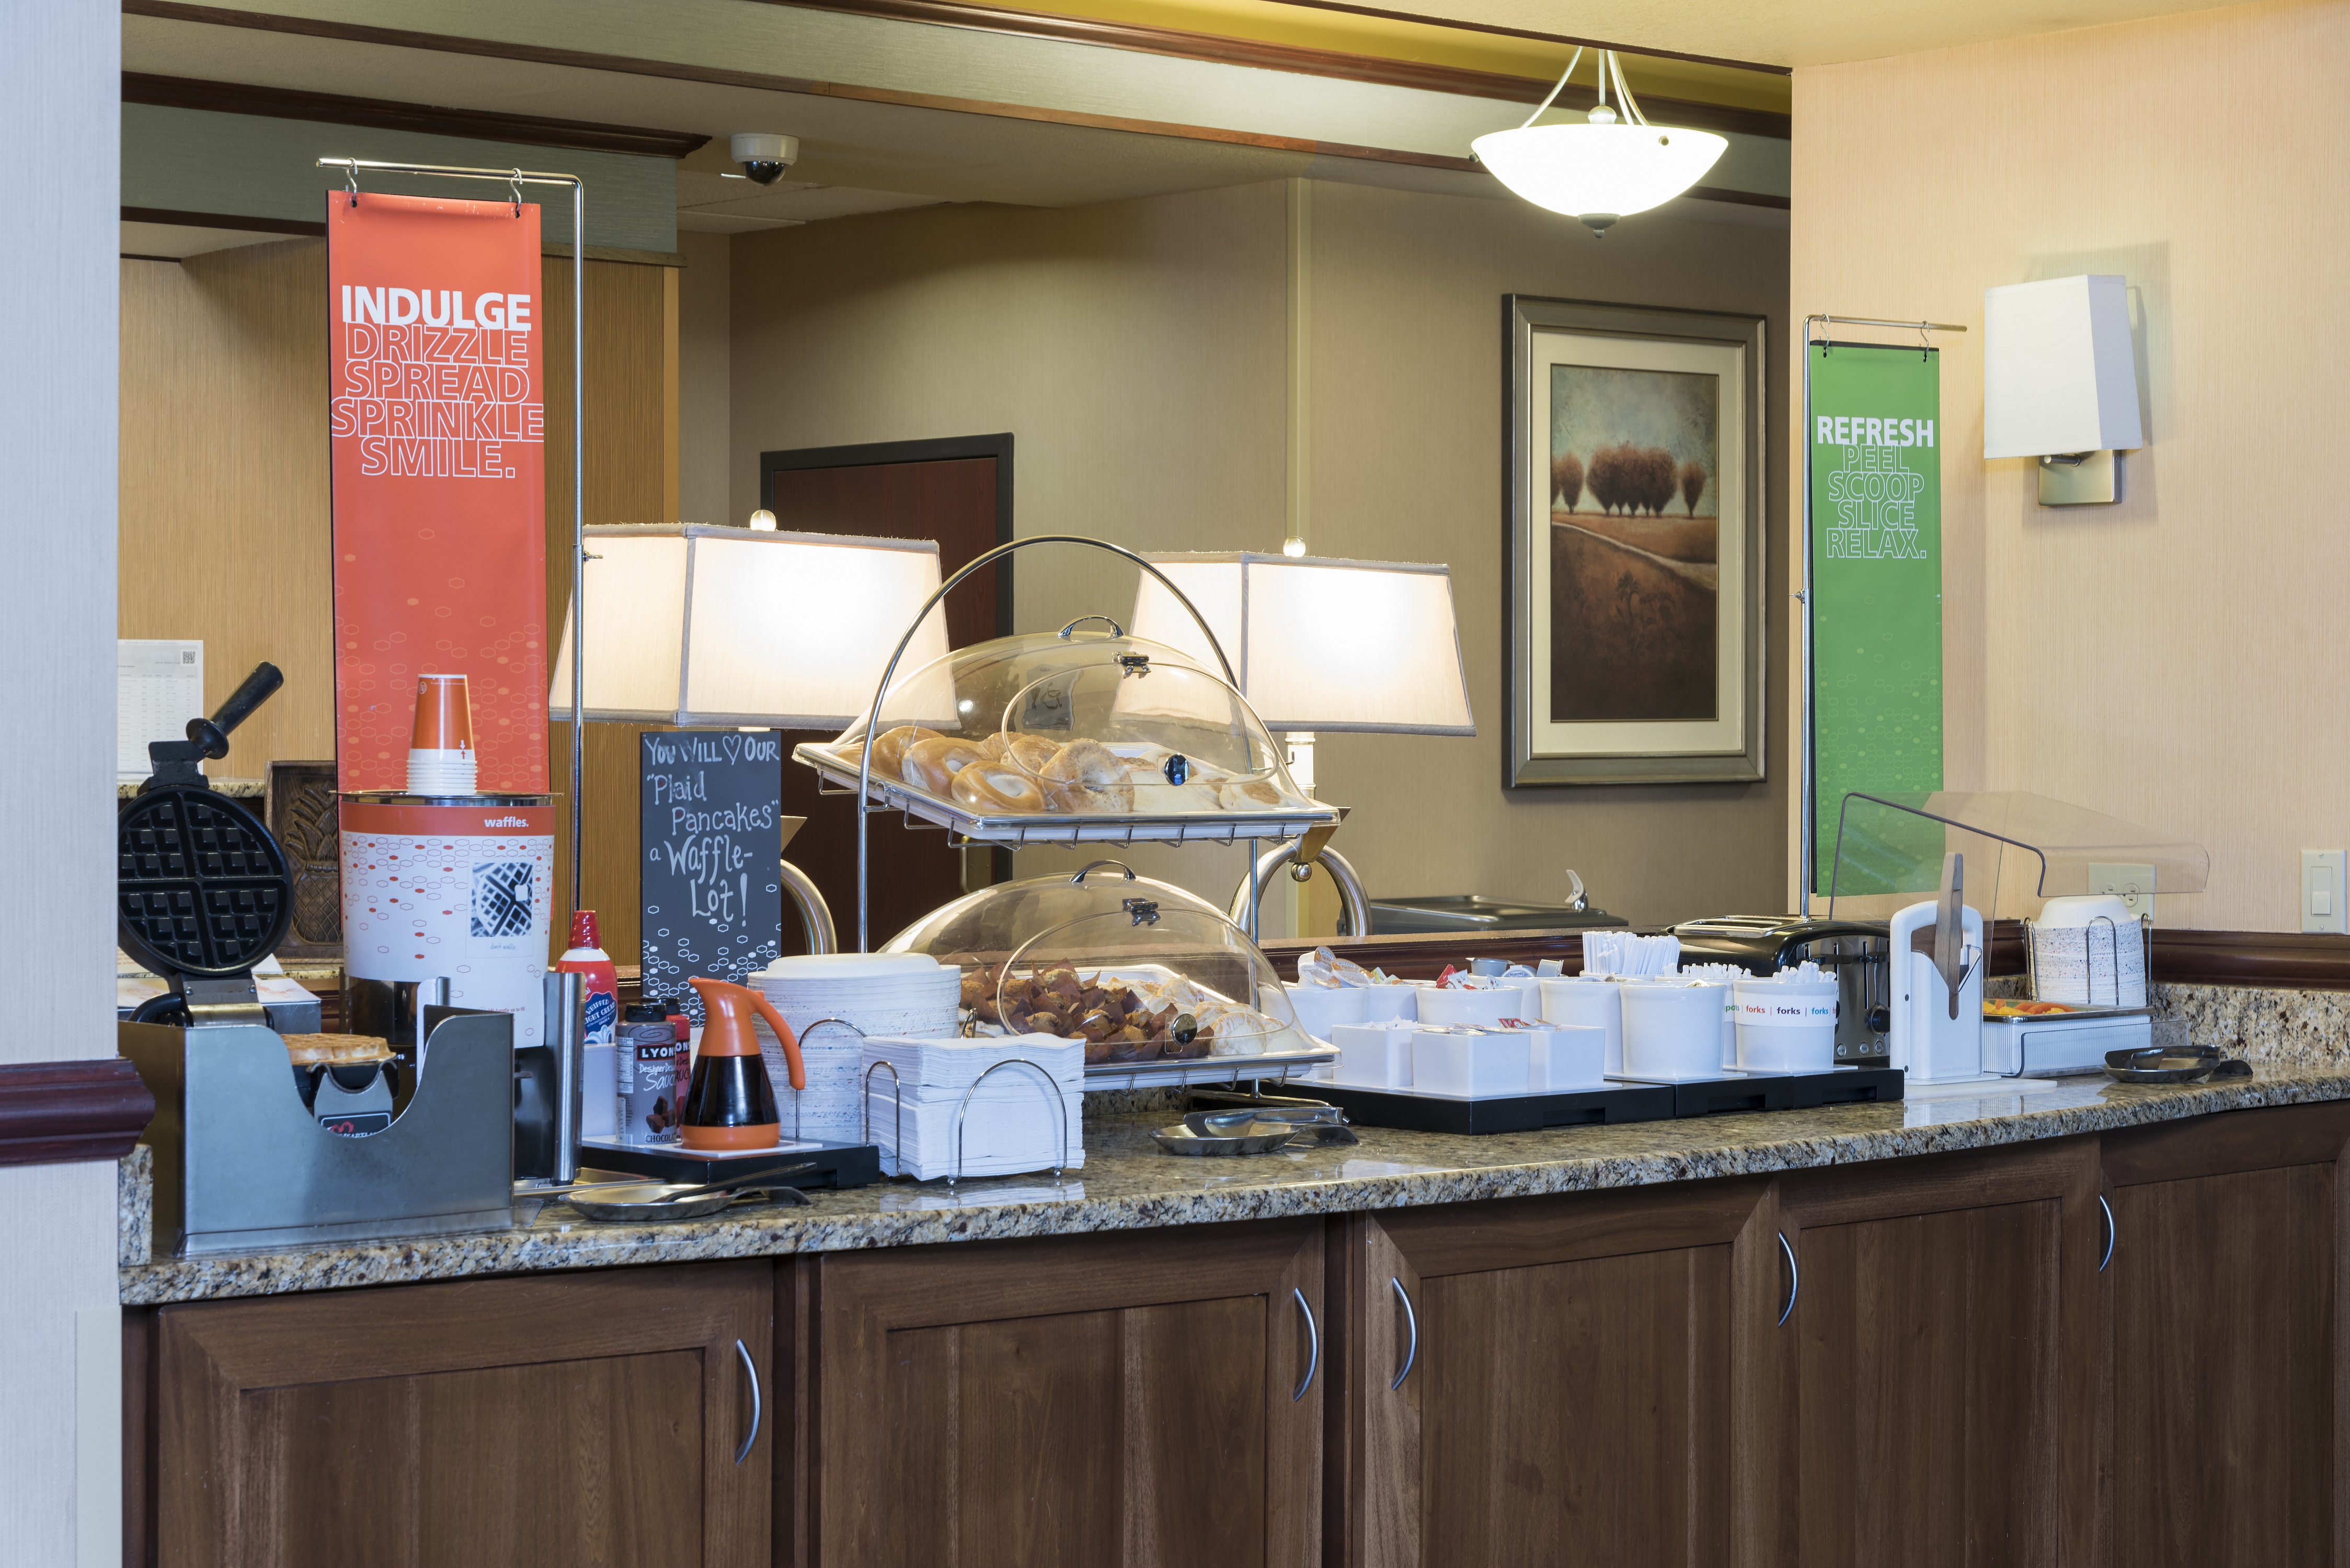 Breakfast Buffet Area Counter with Waffle Maker and Pastry Trays